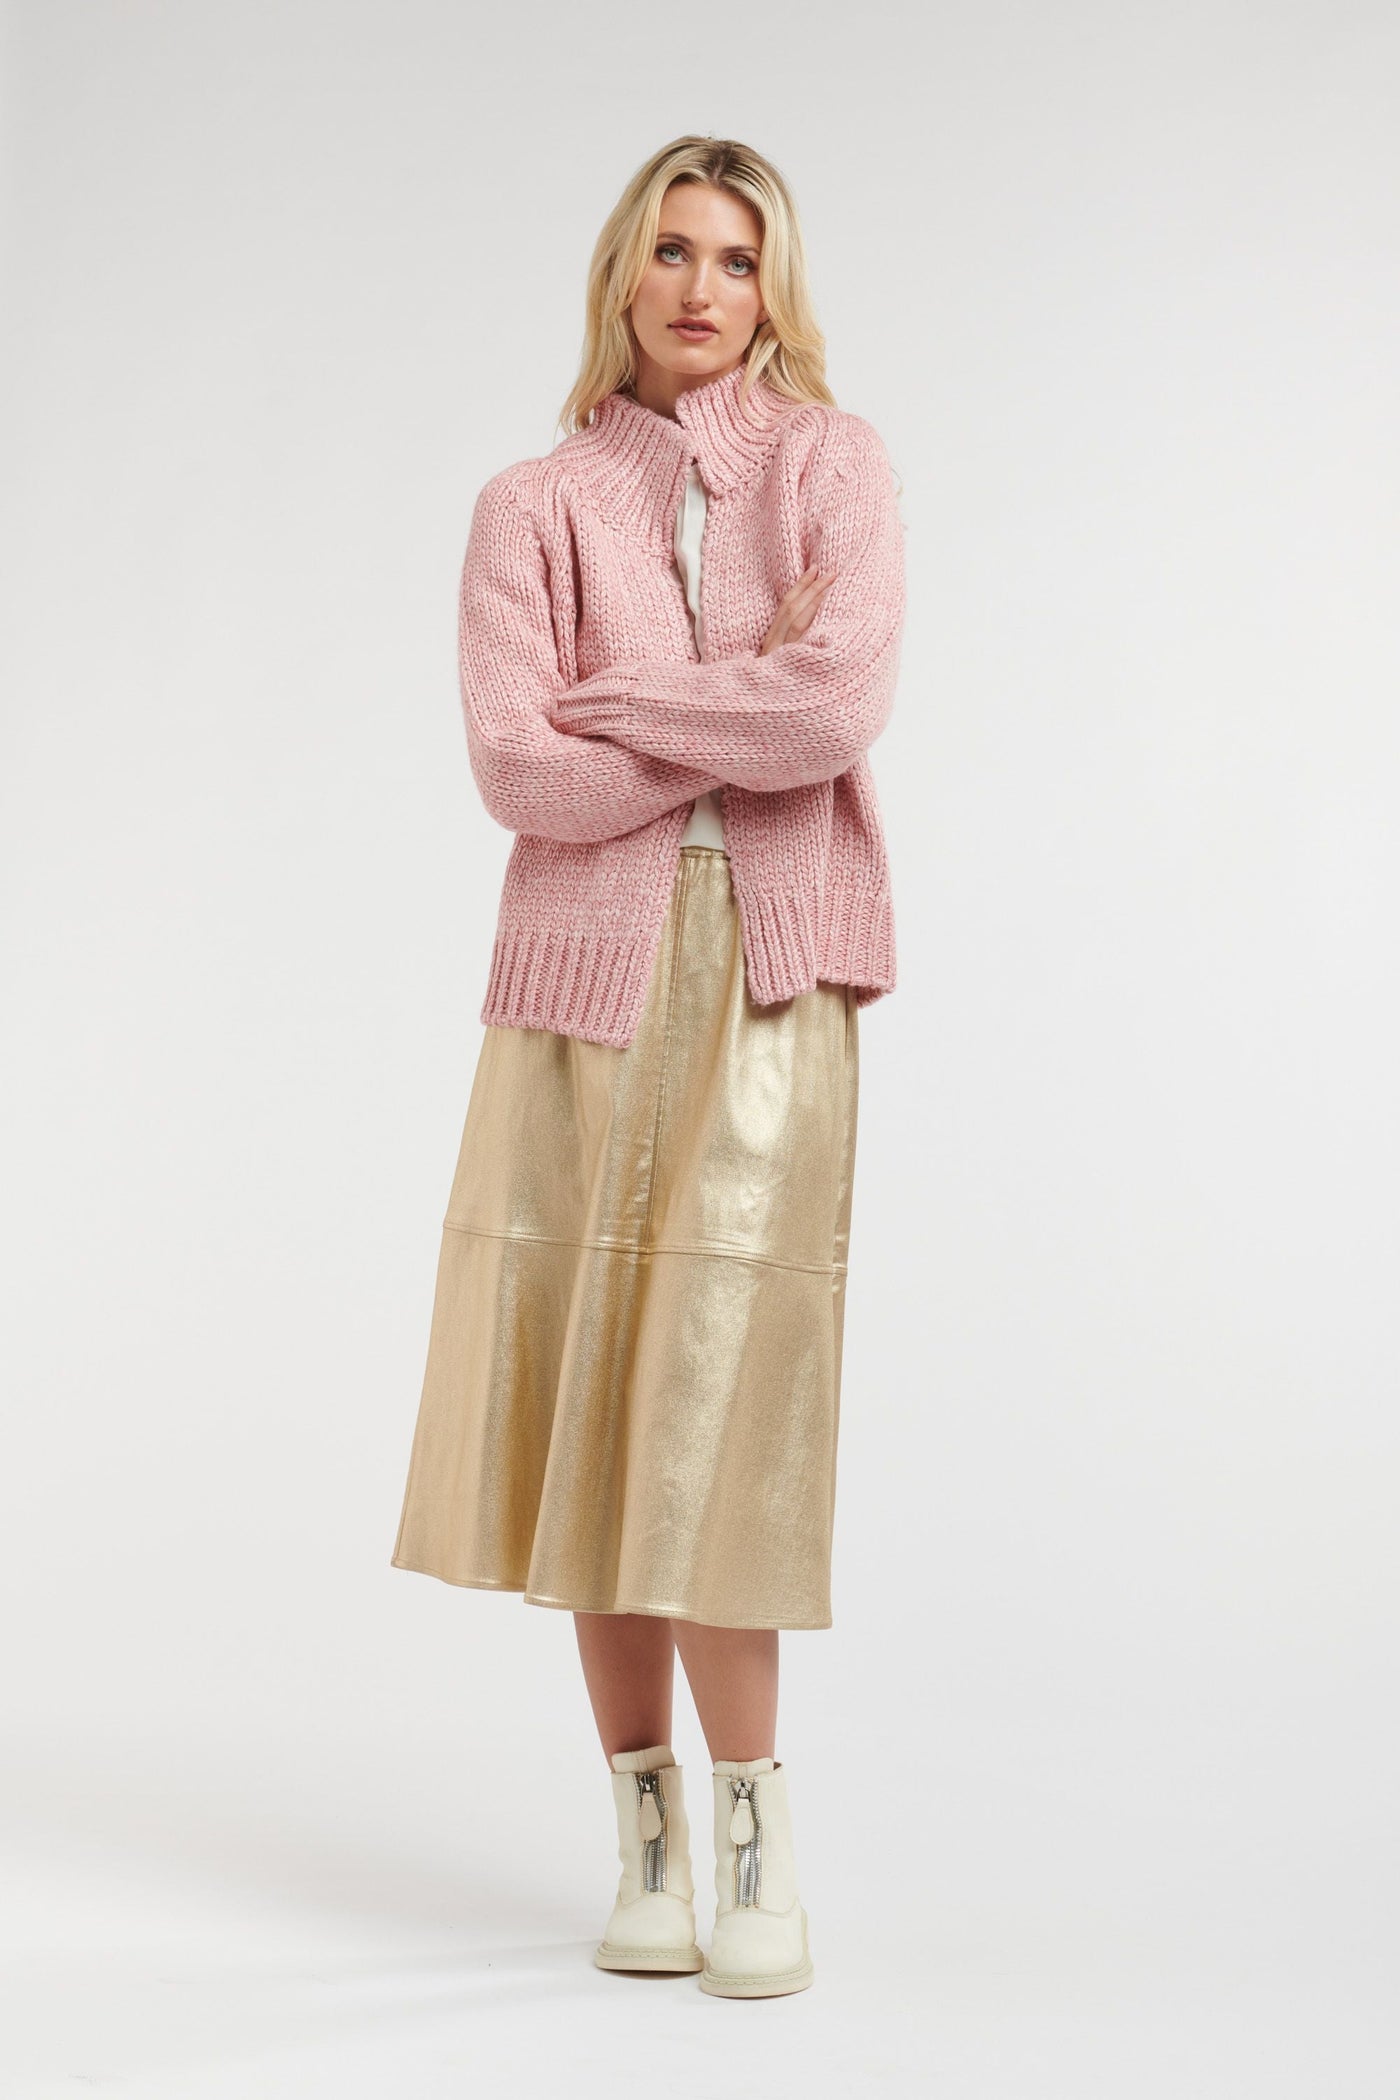 Shine Your Way Skirt - Gold-365 Days-Lima & Co